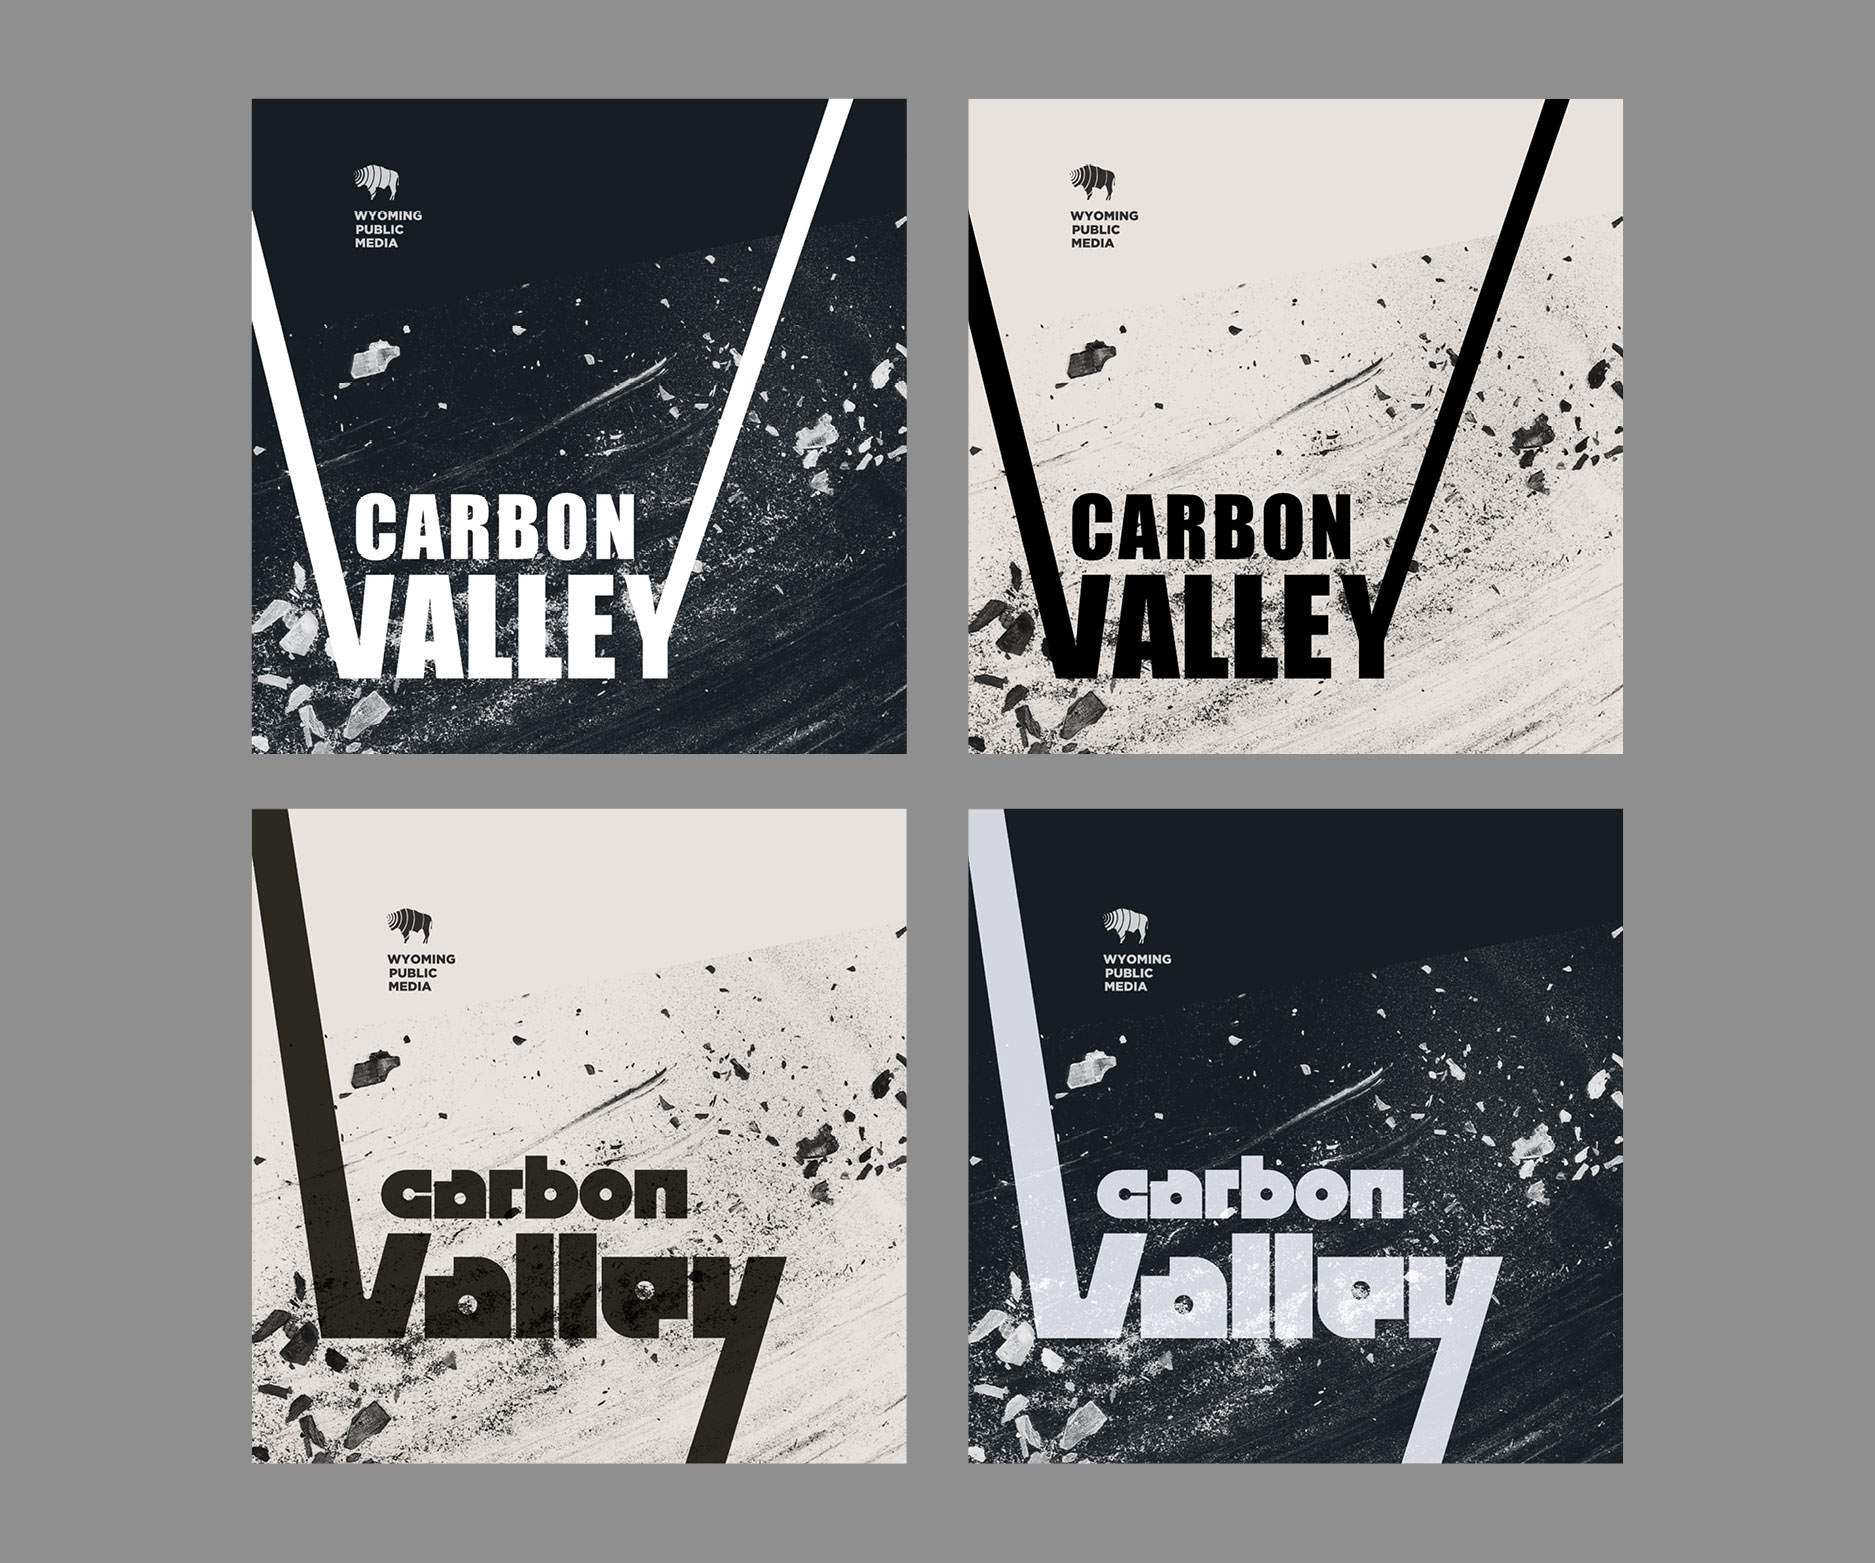 Developed drafts extending the v and y in 'valley' and incorporating a charcoal dust texture.